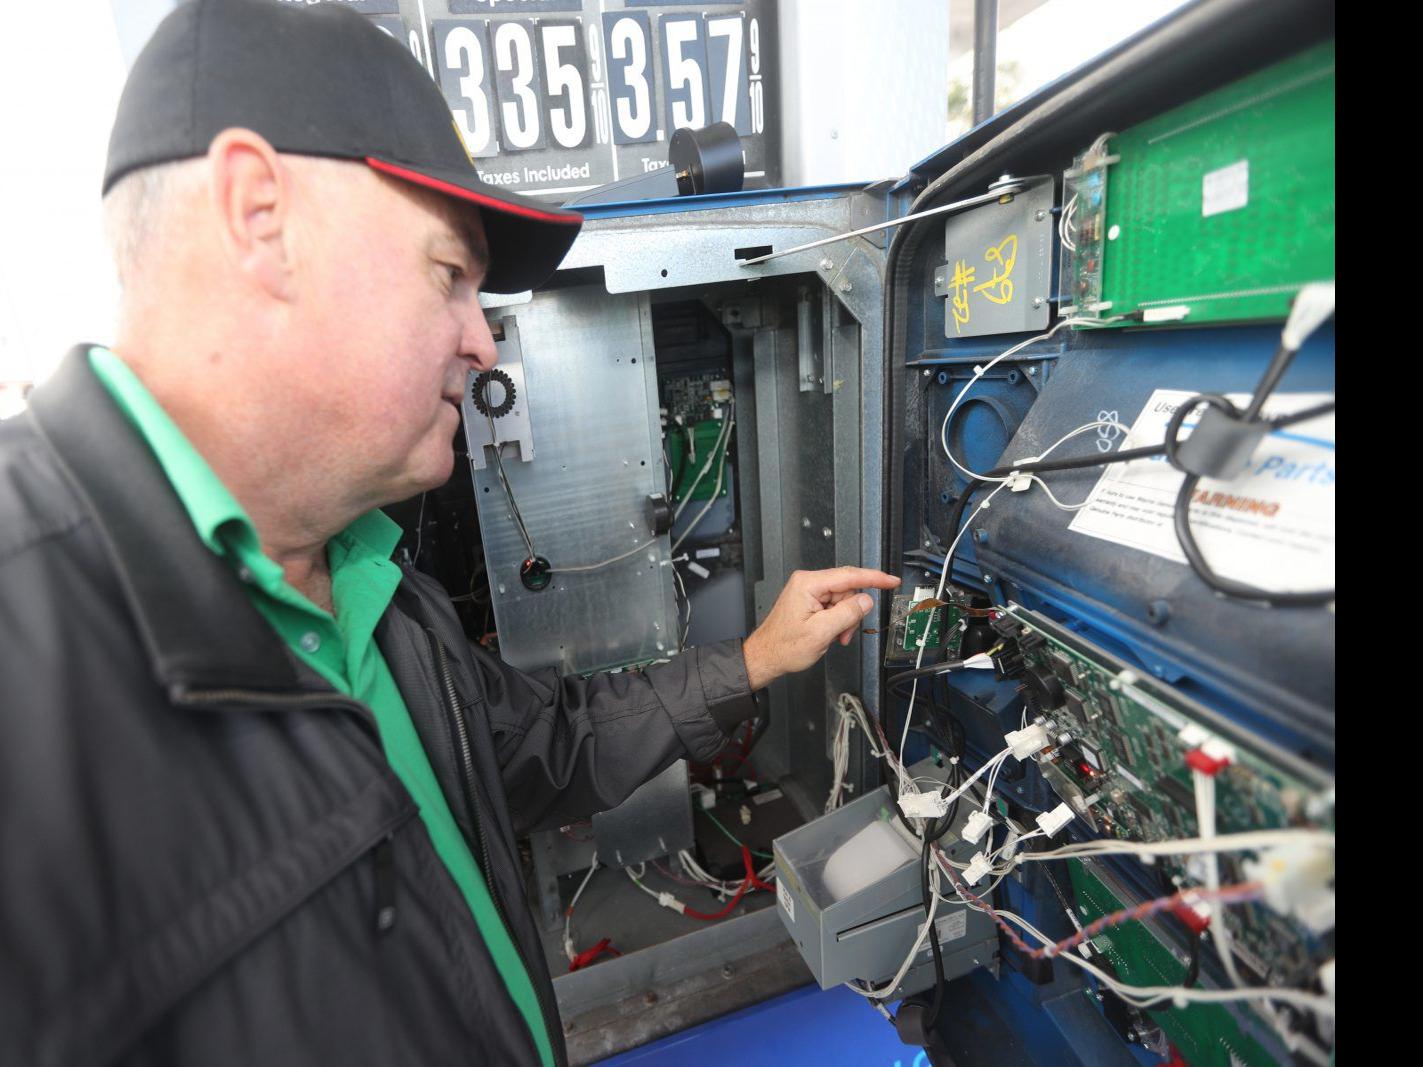 How thieves hack gas pumps and steal | Crime News |